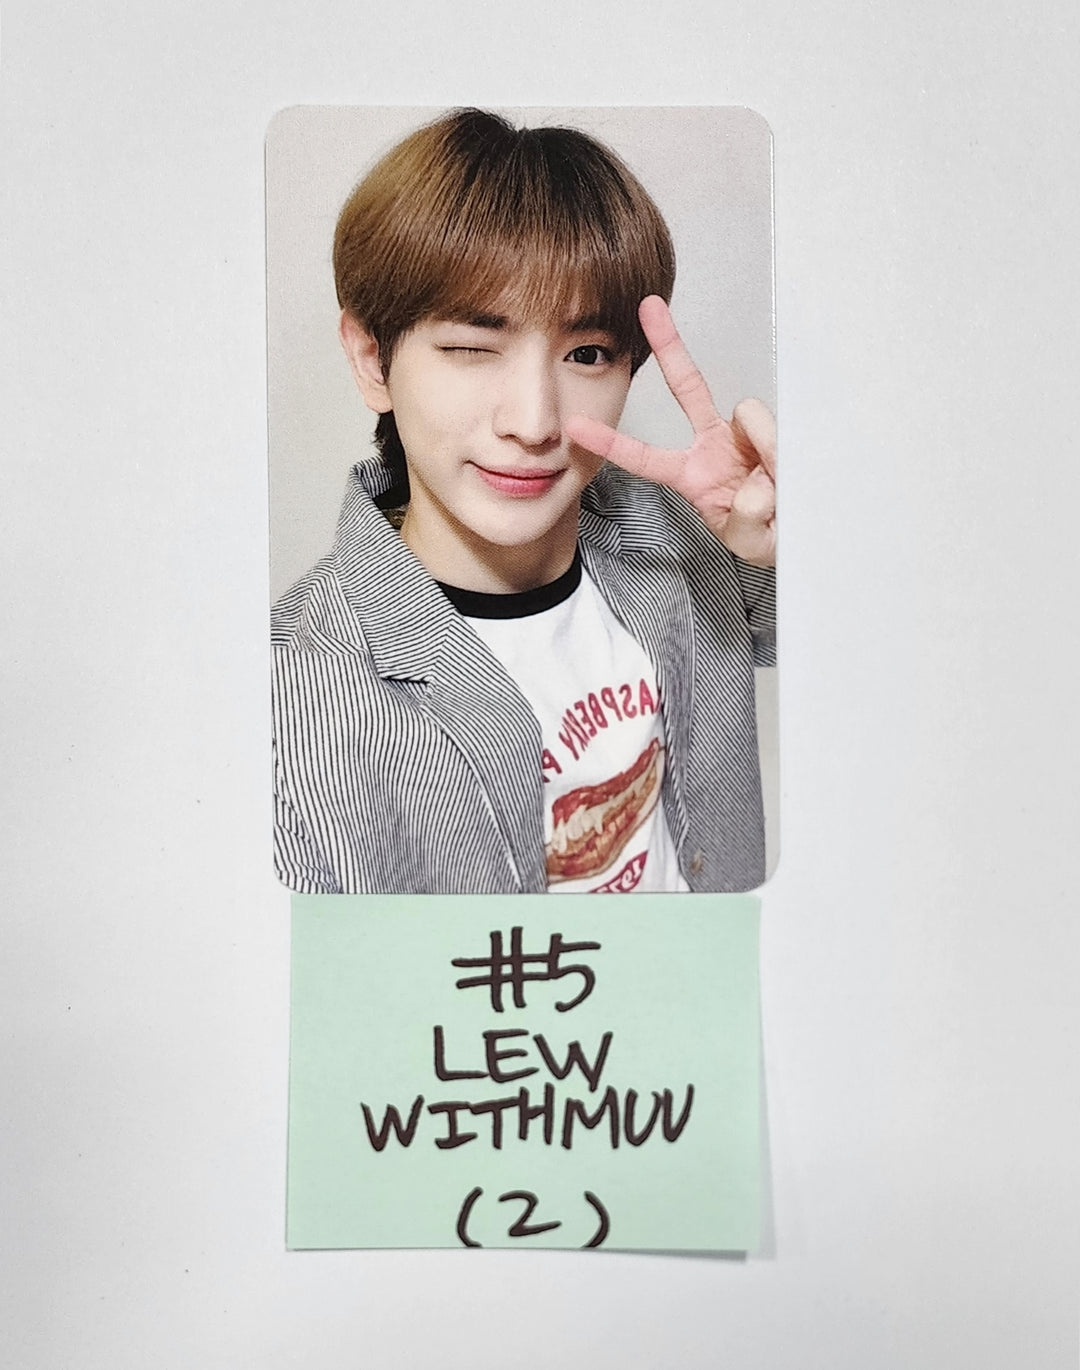 TEMPEST "It's ME" - Withmuu Fansign Event Photocard Round 2